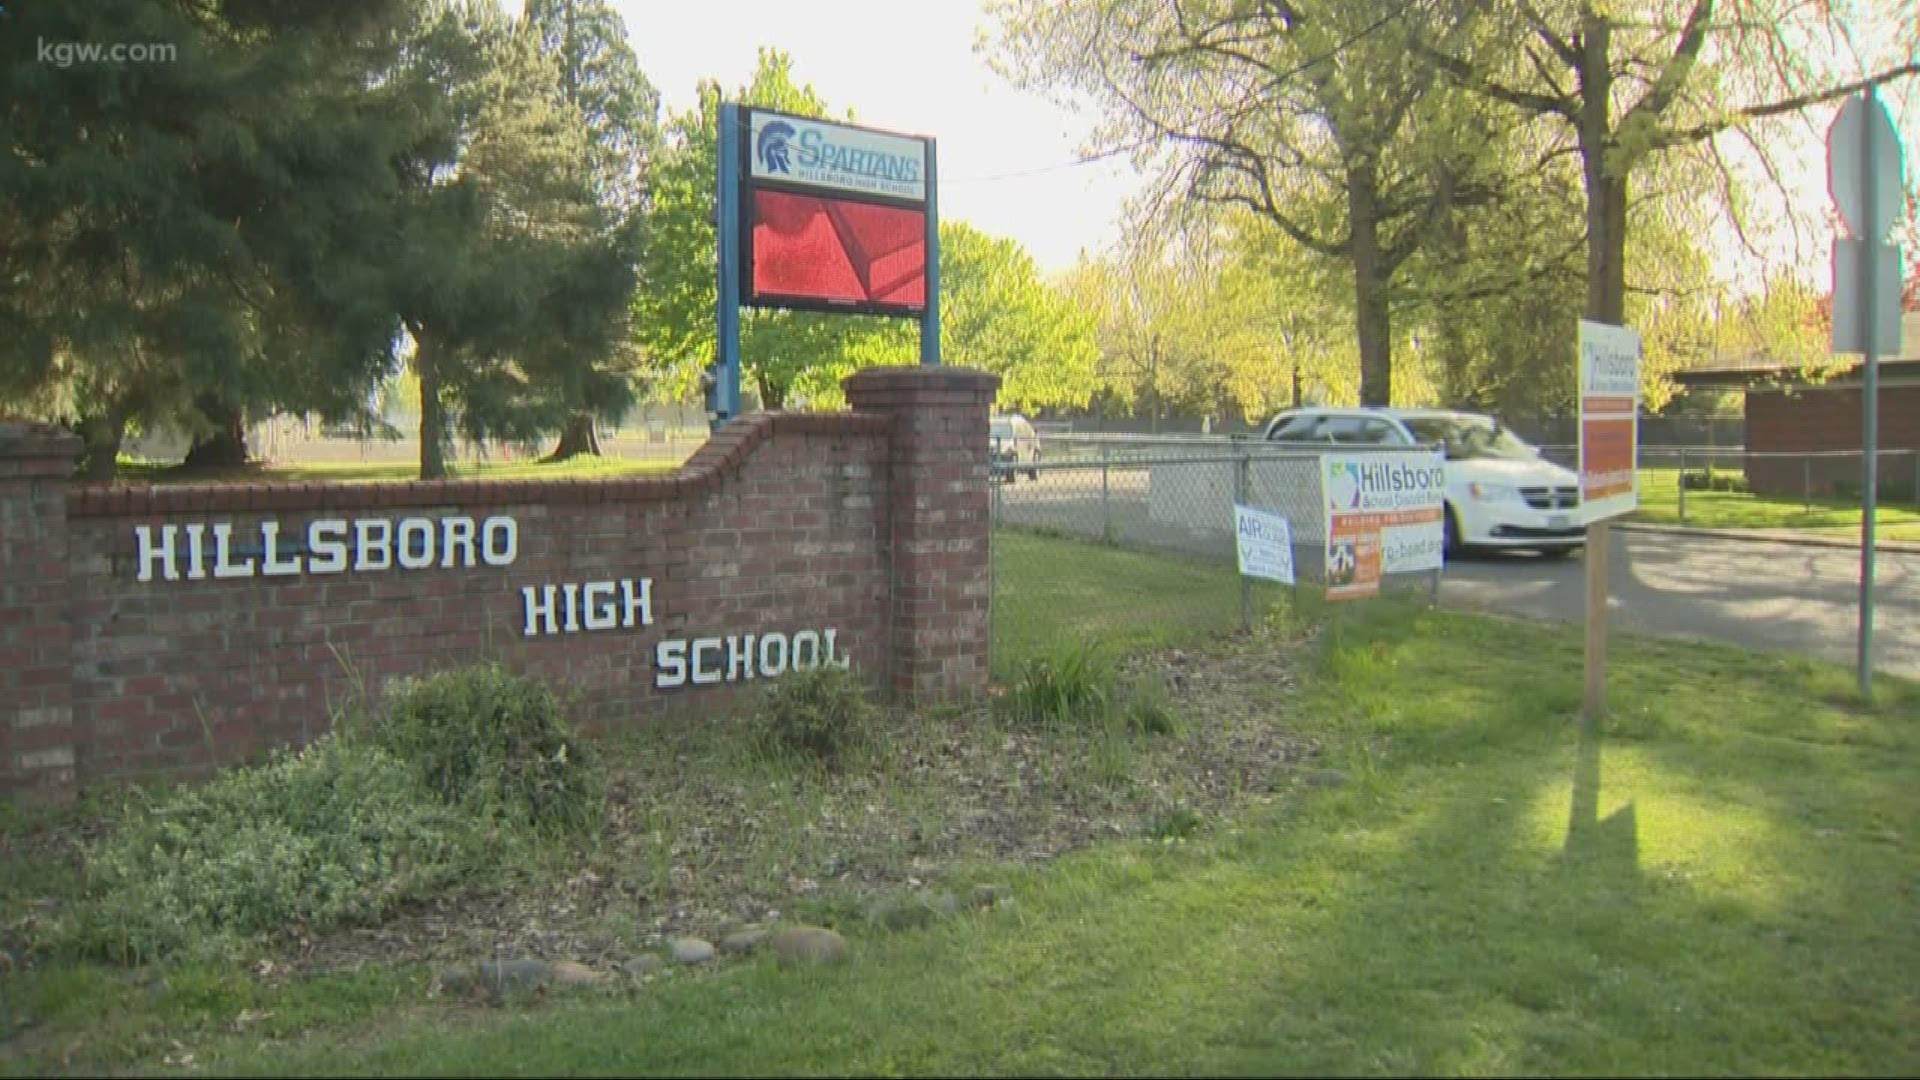 Five Hillsboro High School students were taken to the hospital after they appeared to be under the influence of intoxicants, according to the school’s principal.